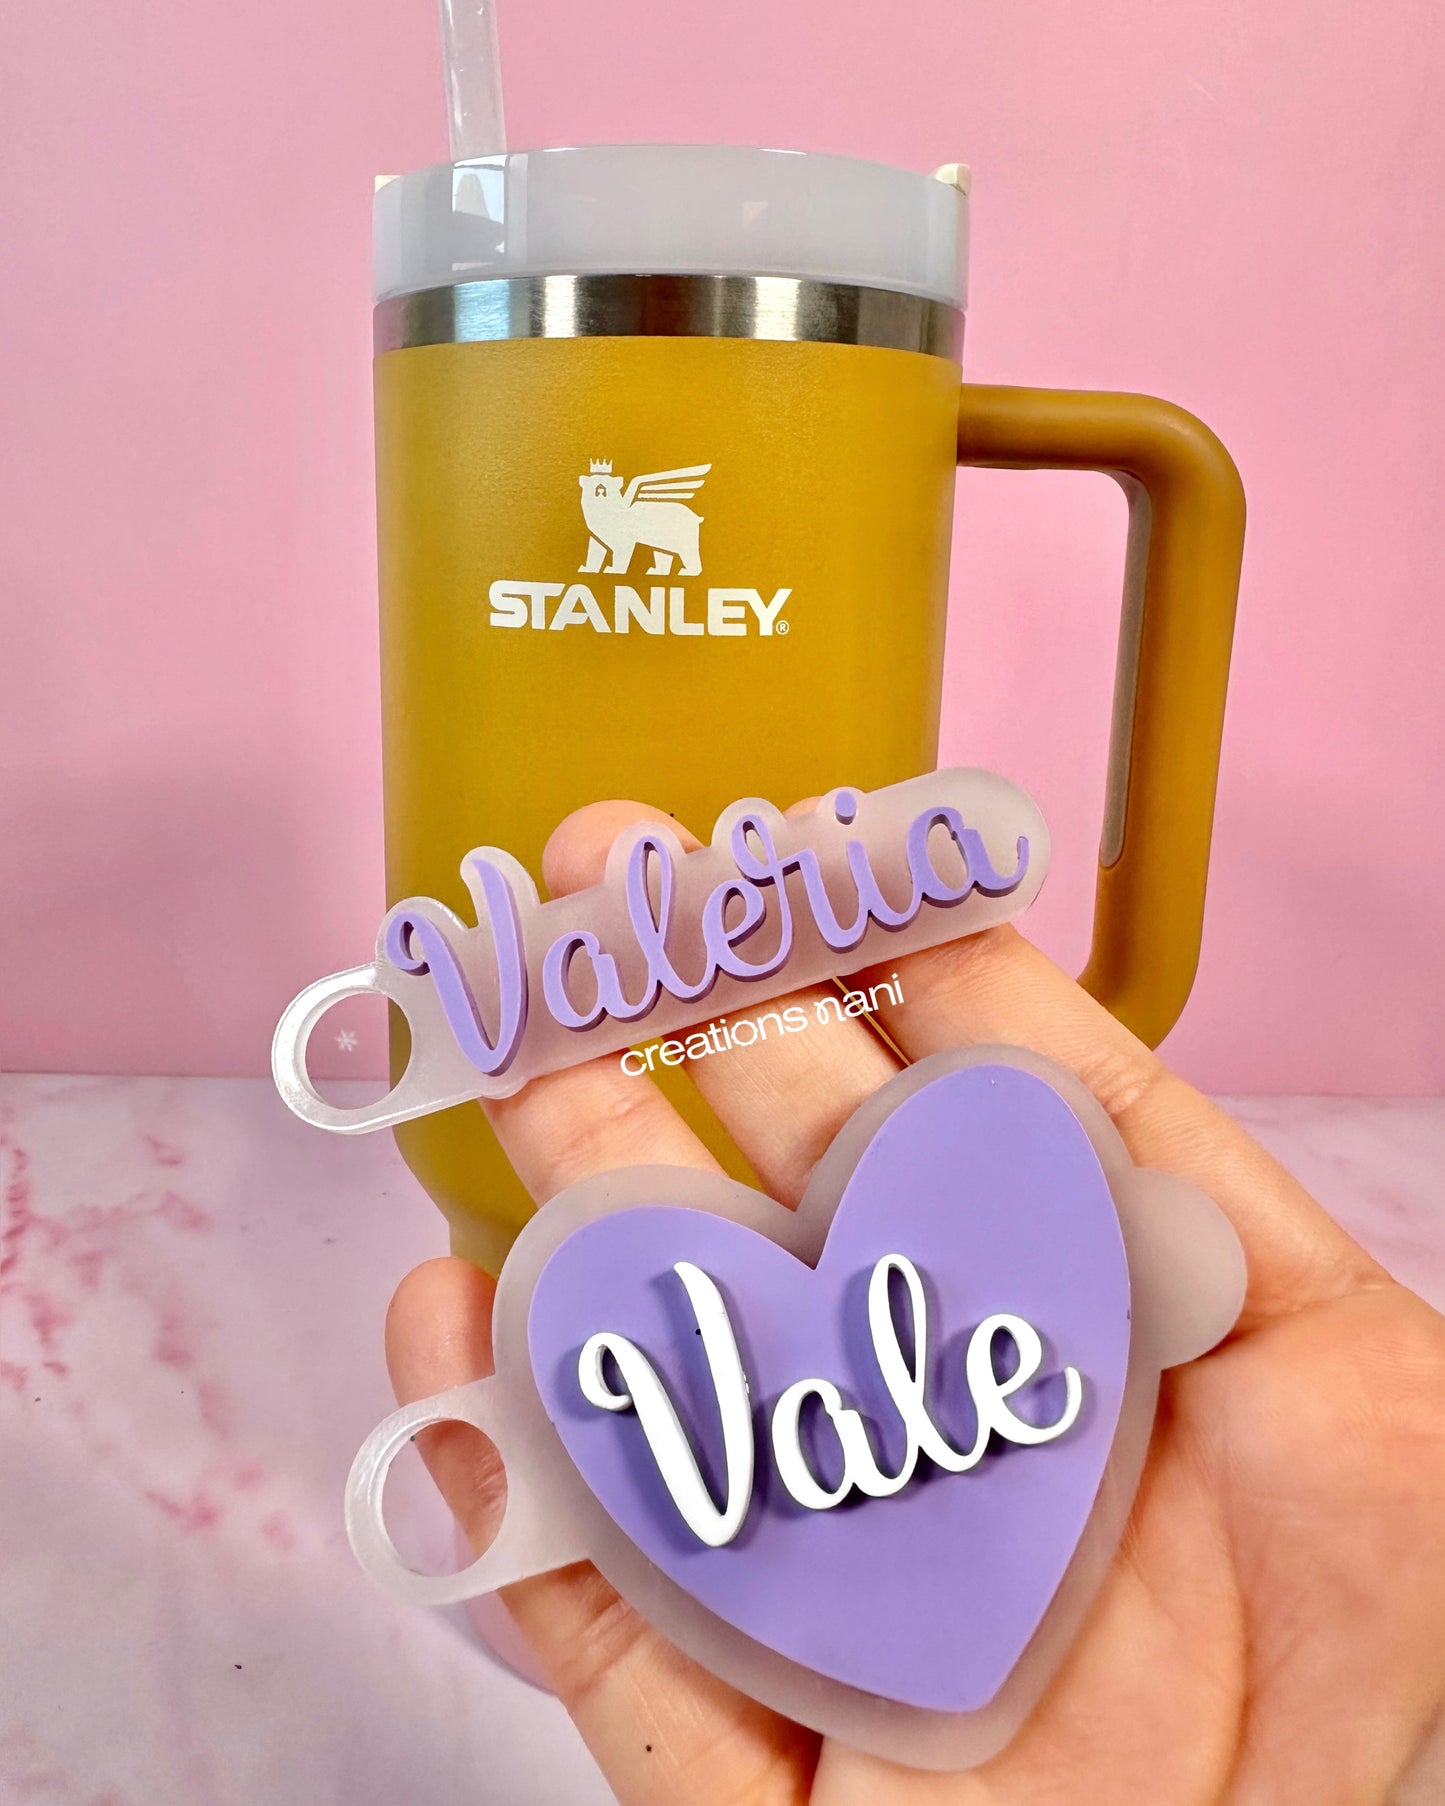 30 oz - Stanley Name Plate